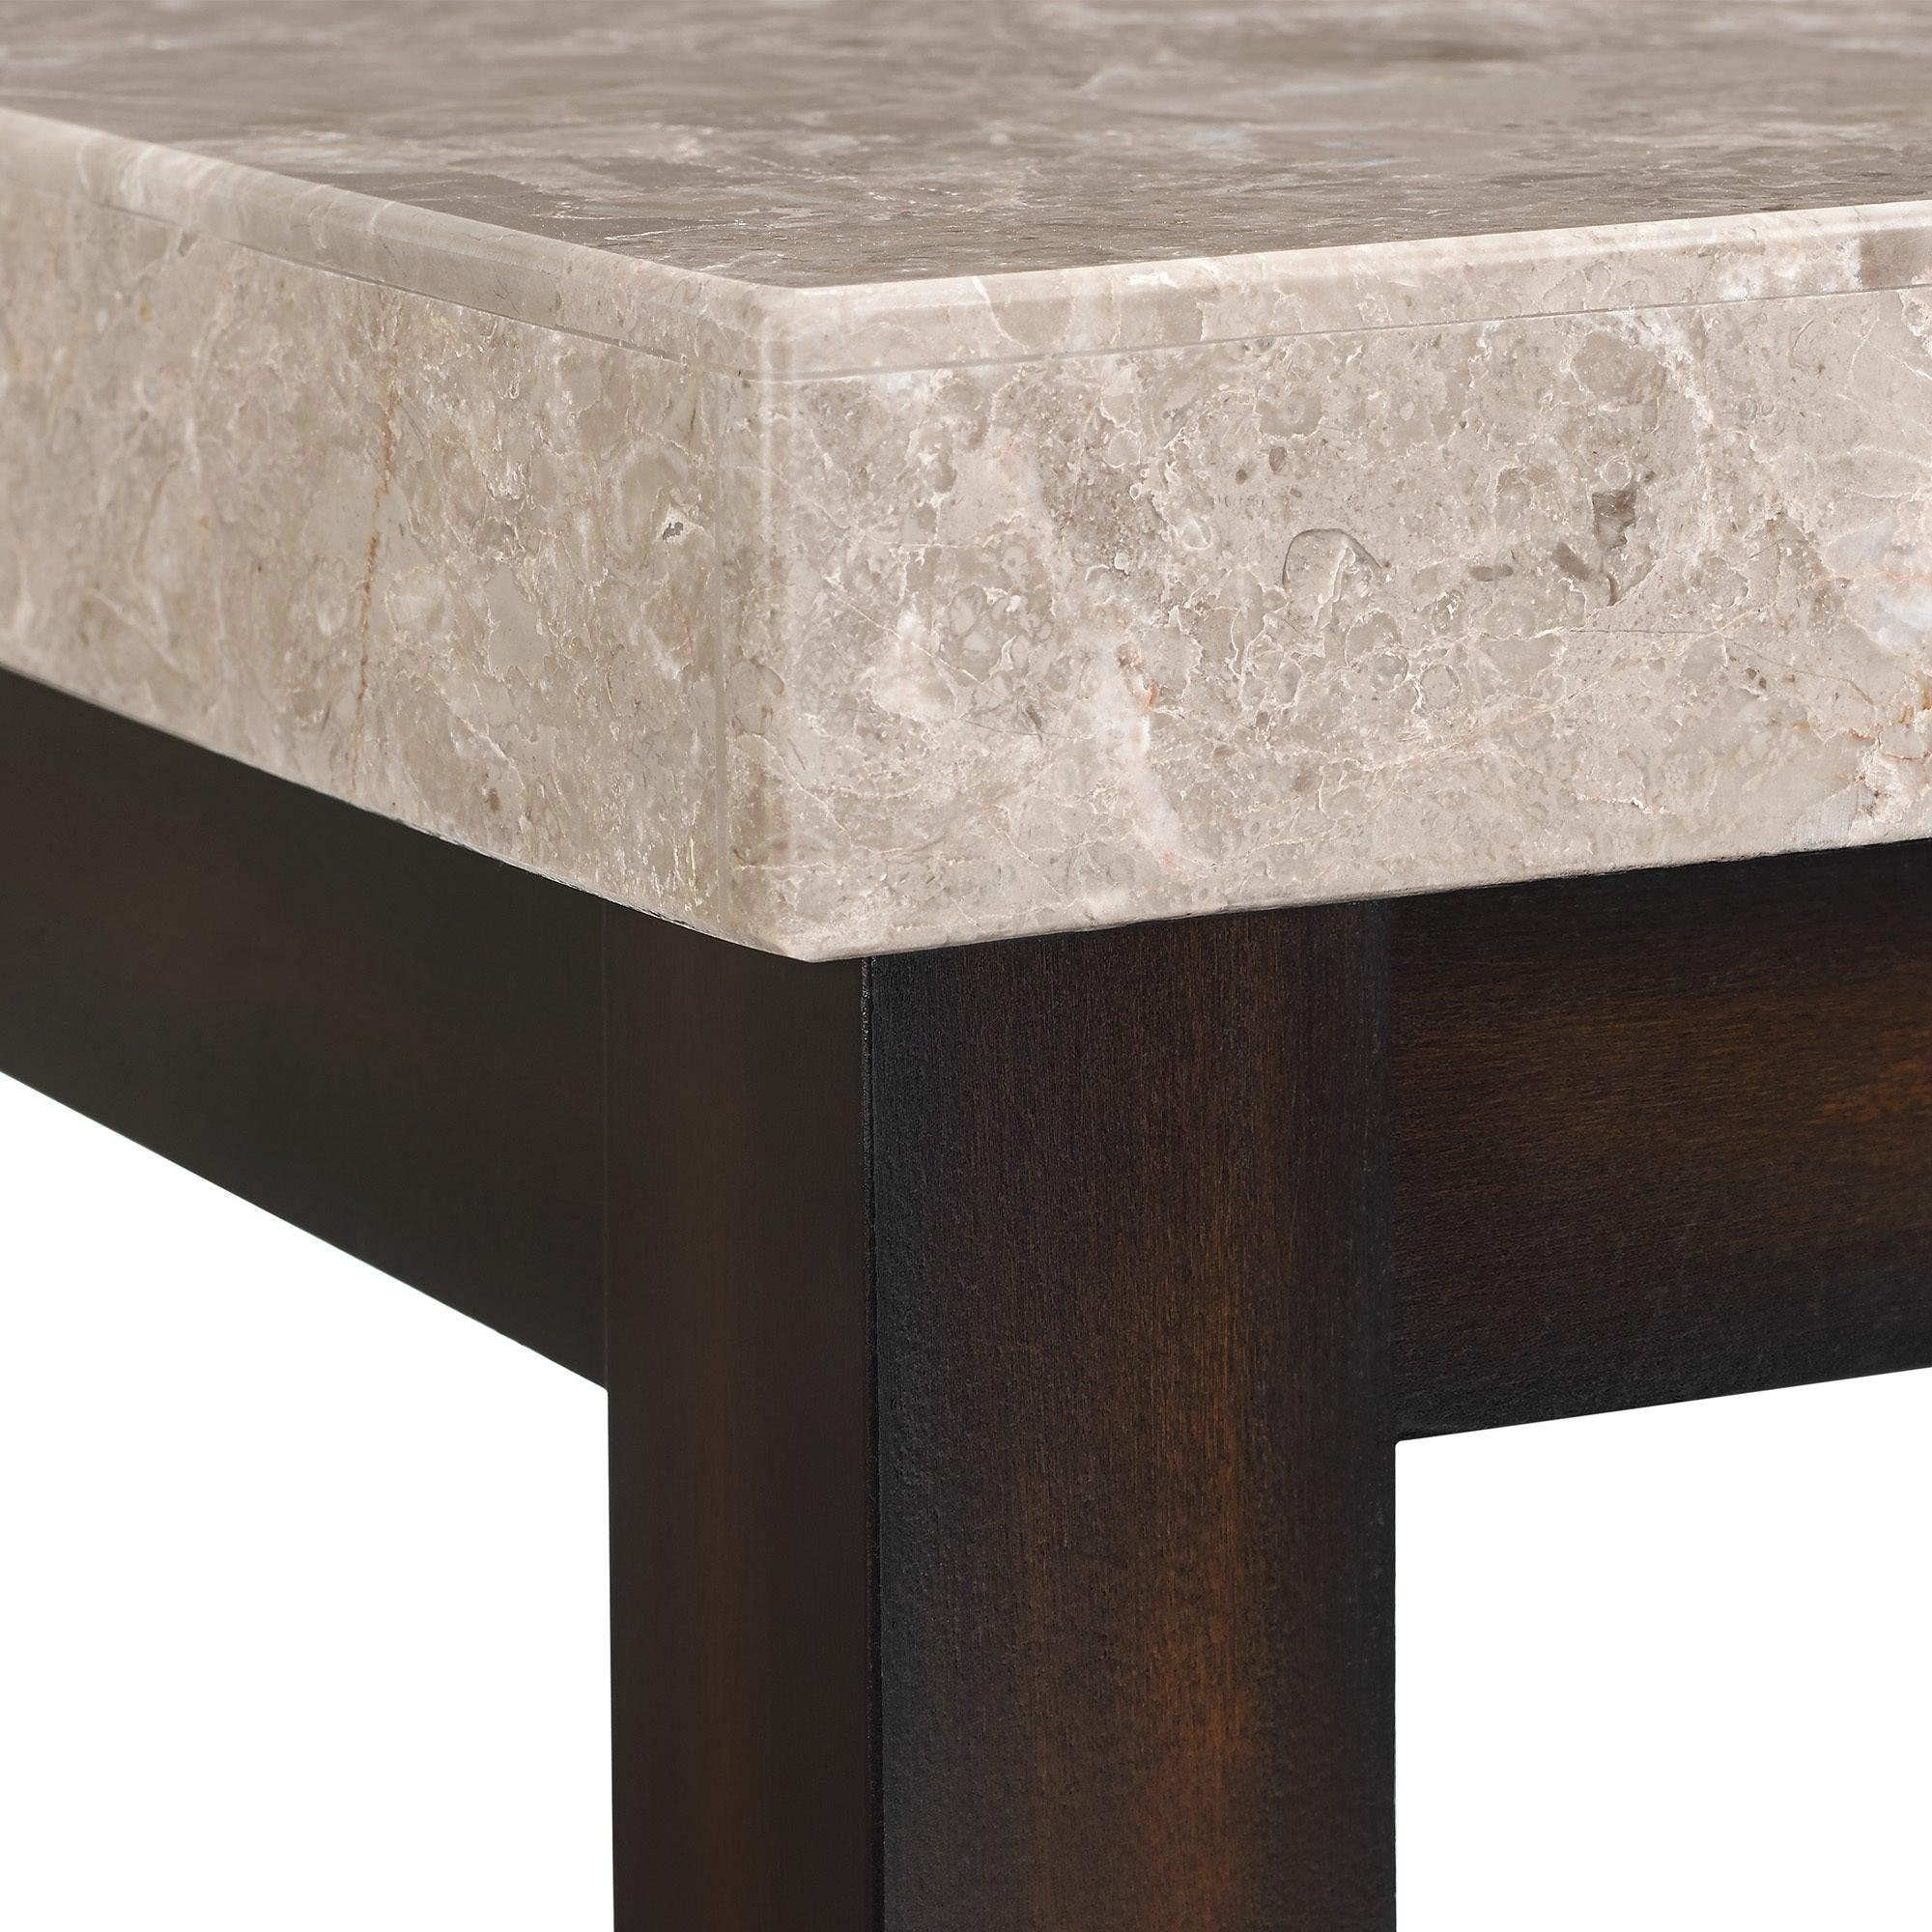 Elements Side & End Tables - Caleb End Table Espresso